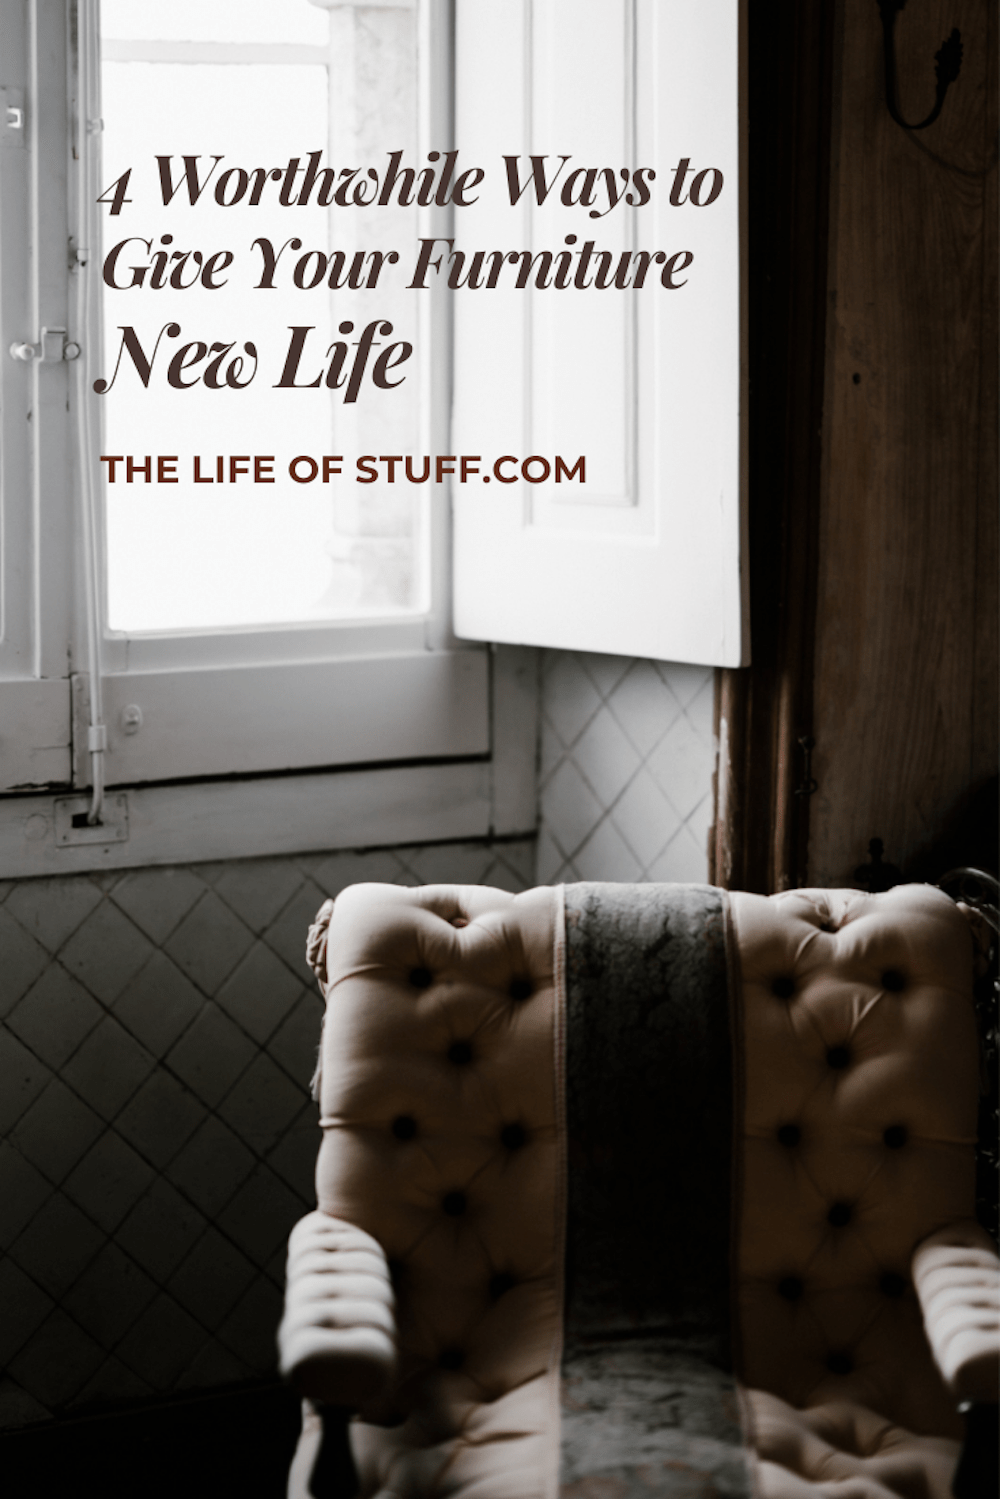 4 Worthwhile Ways to Give Your Furniture New Life - The Life of Stuff